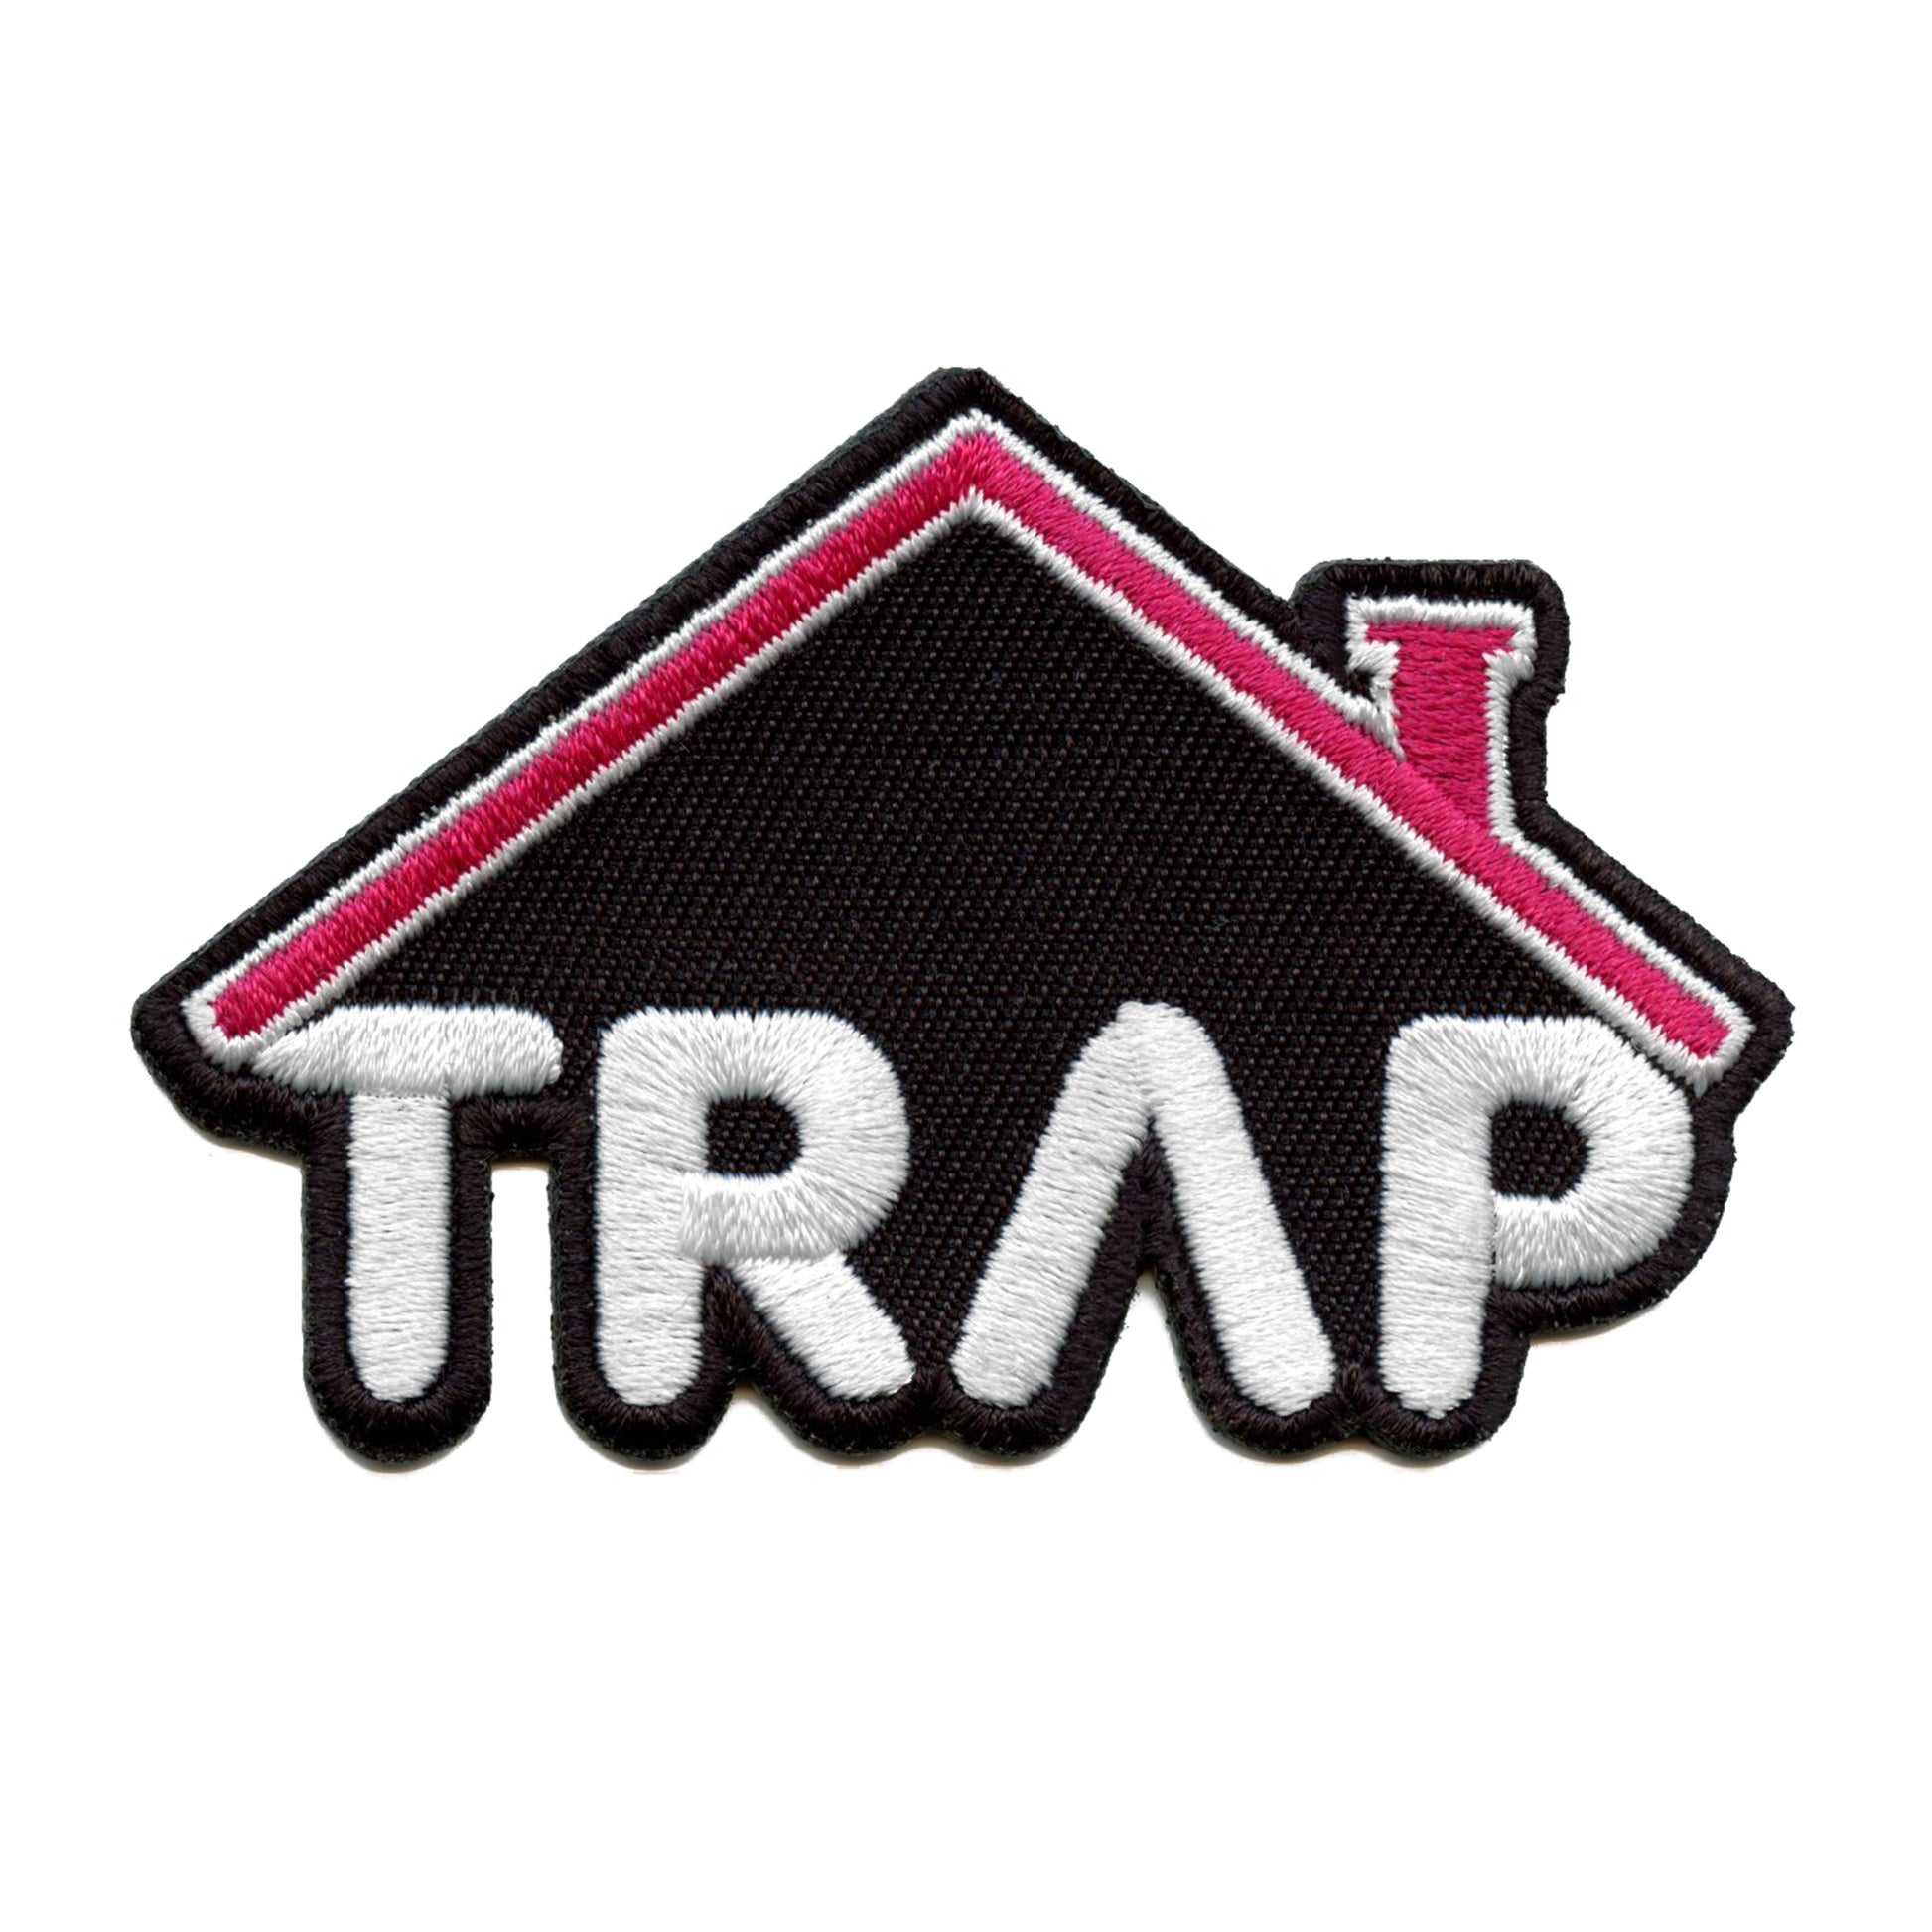 Neon Trap House Patch Popular Pink Script Embroidered Iron On 